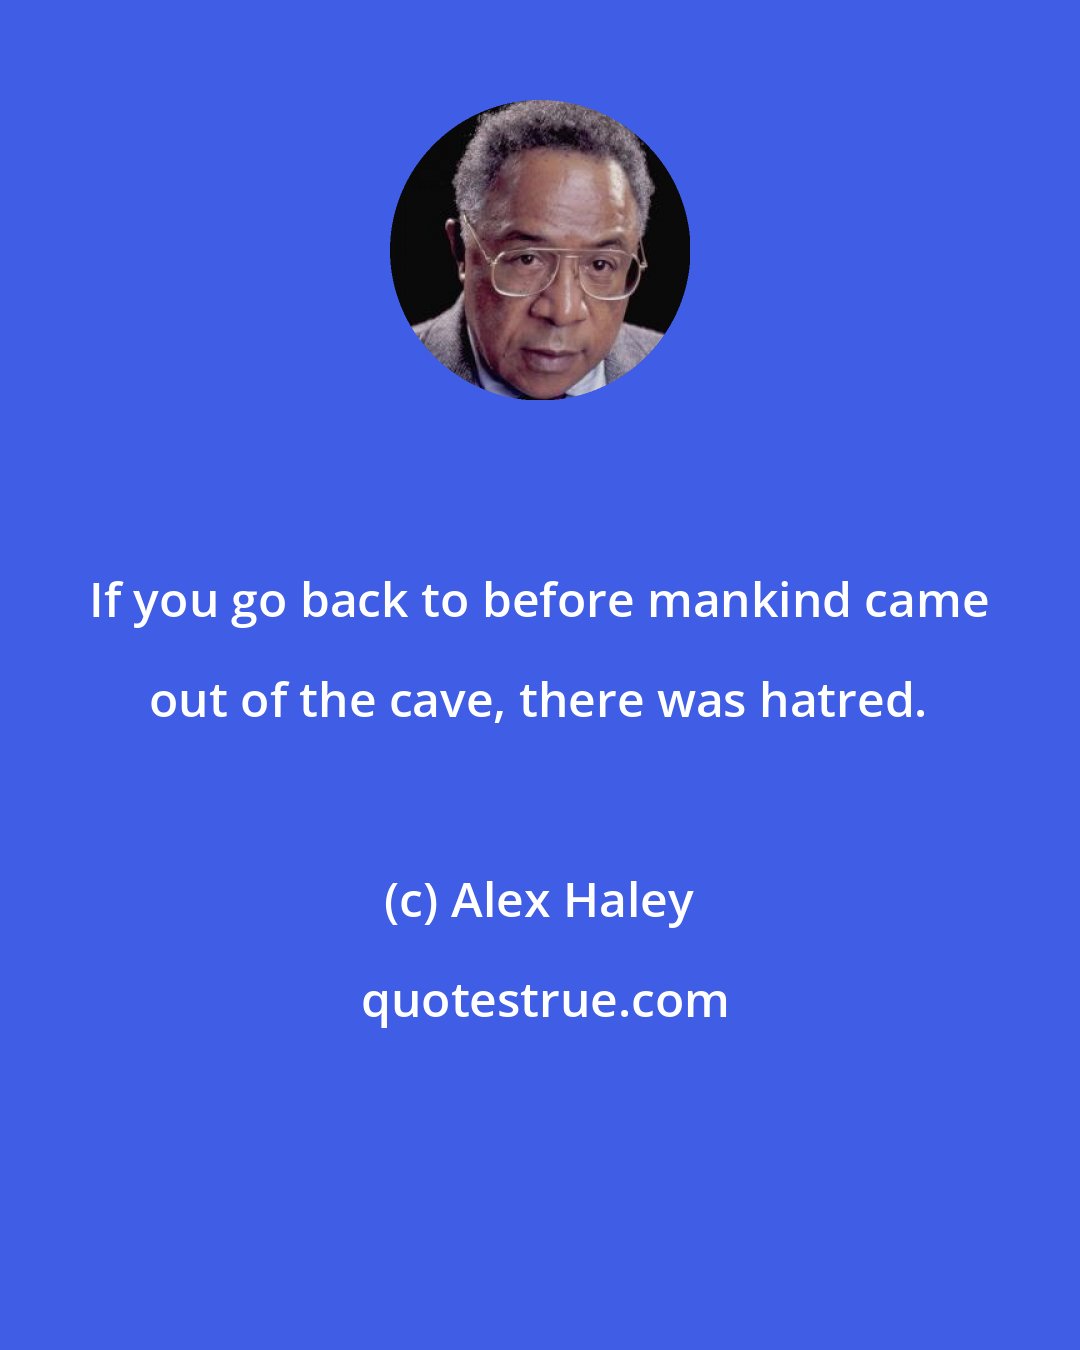 Alex Haley: If you go back to before mankind came out of the cave, there was hatred.